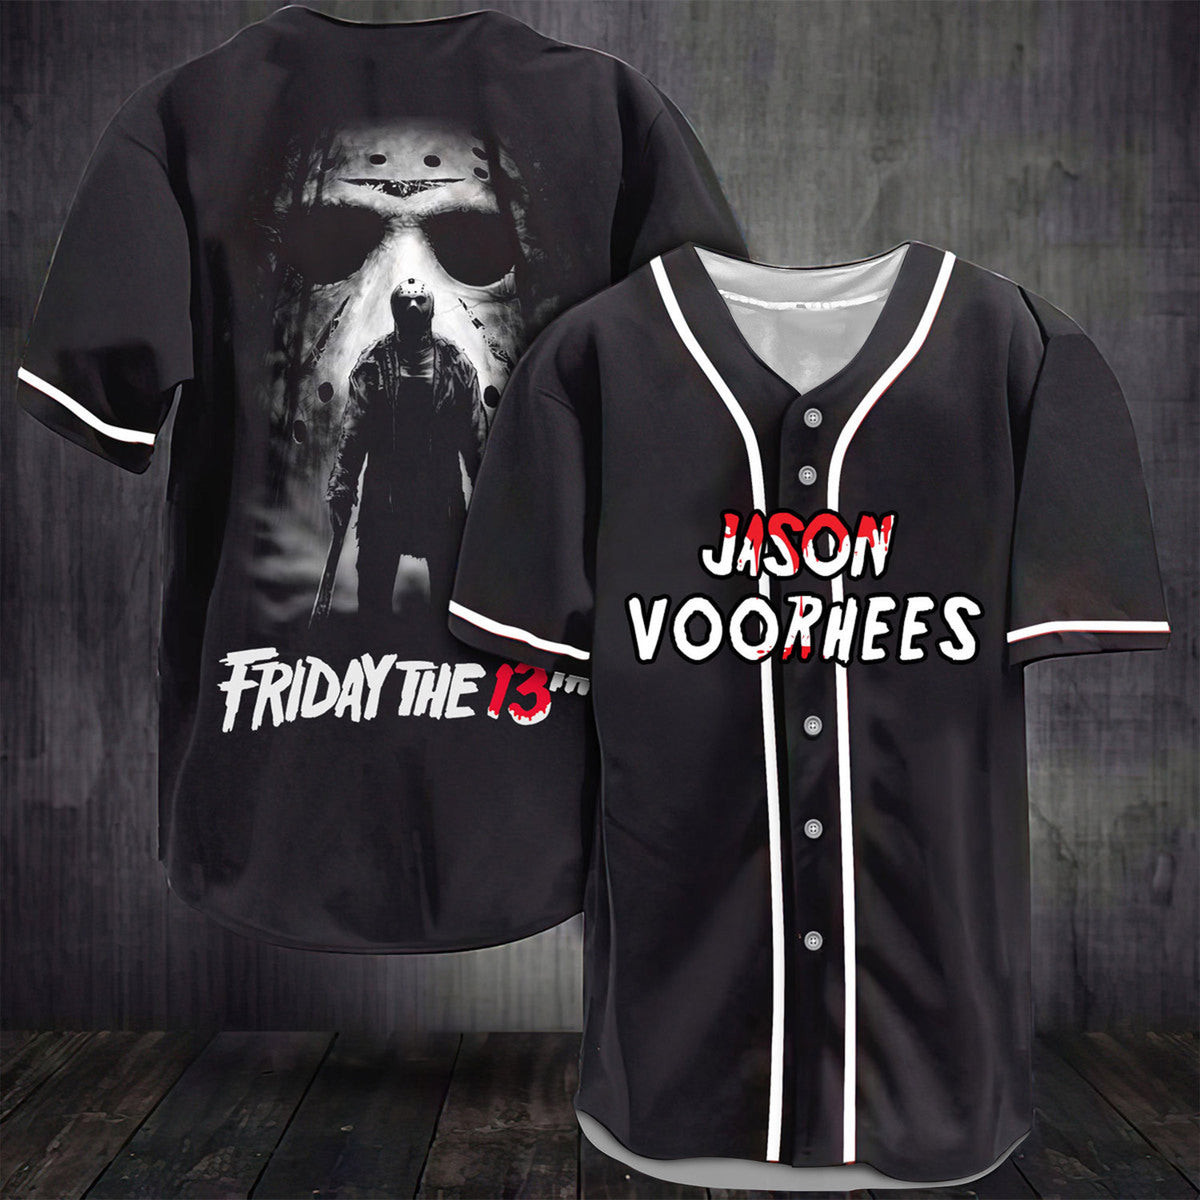 Black Friday The 13th Jason Voorhees Jersey Shirt